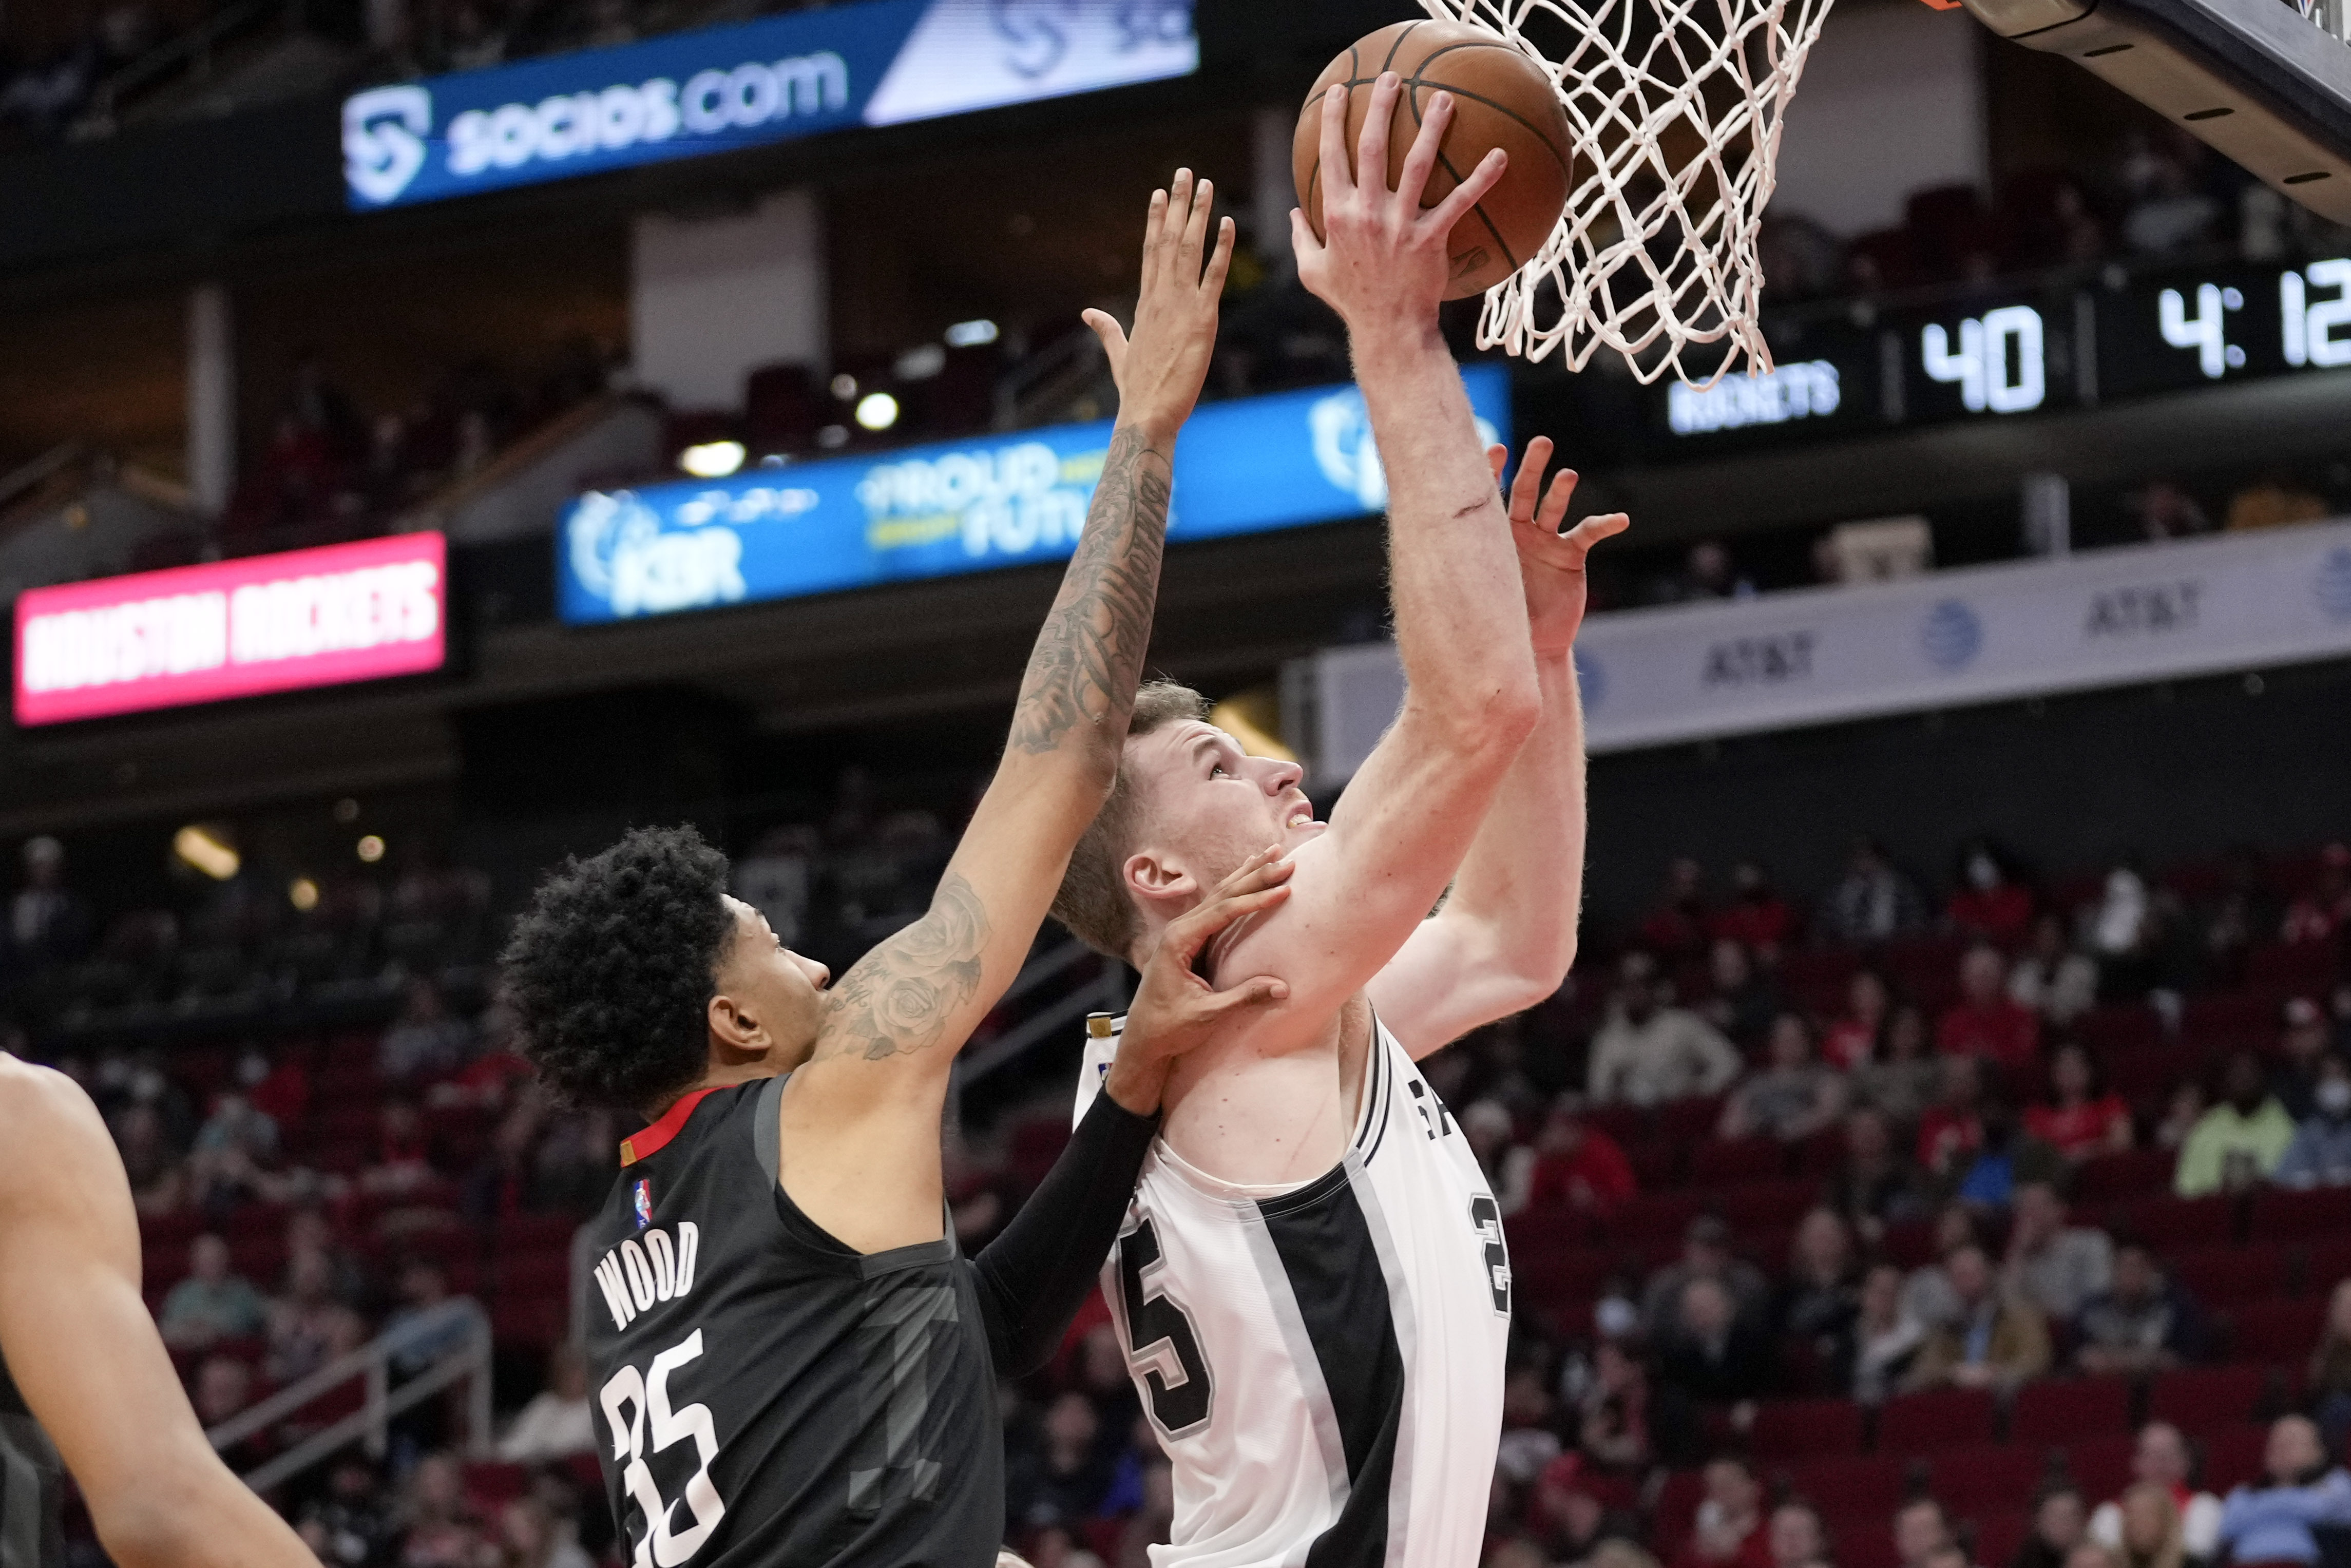 With Poeltl questionable, rookie Drew Eubanks' role could expand